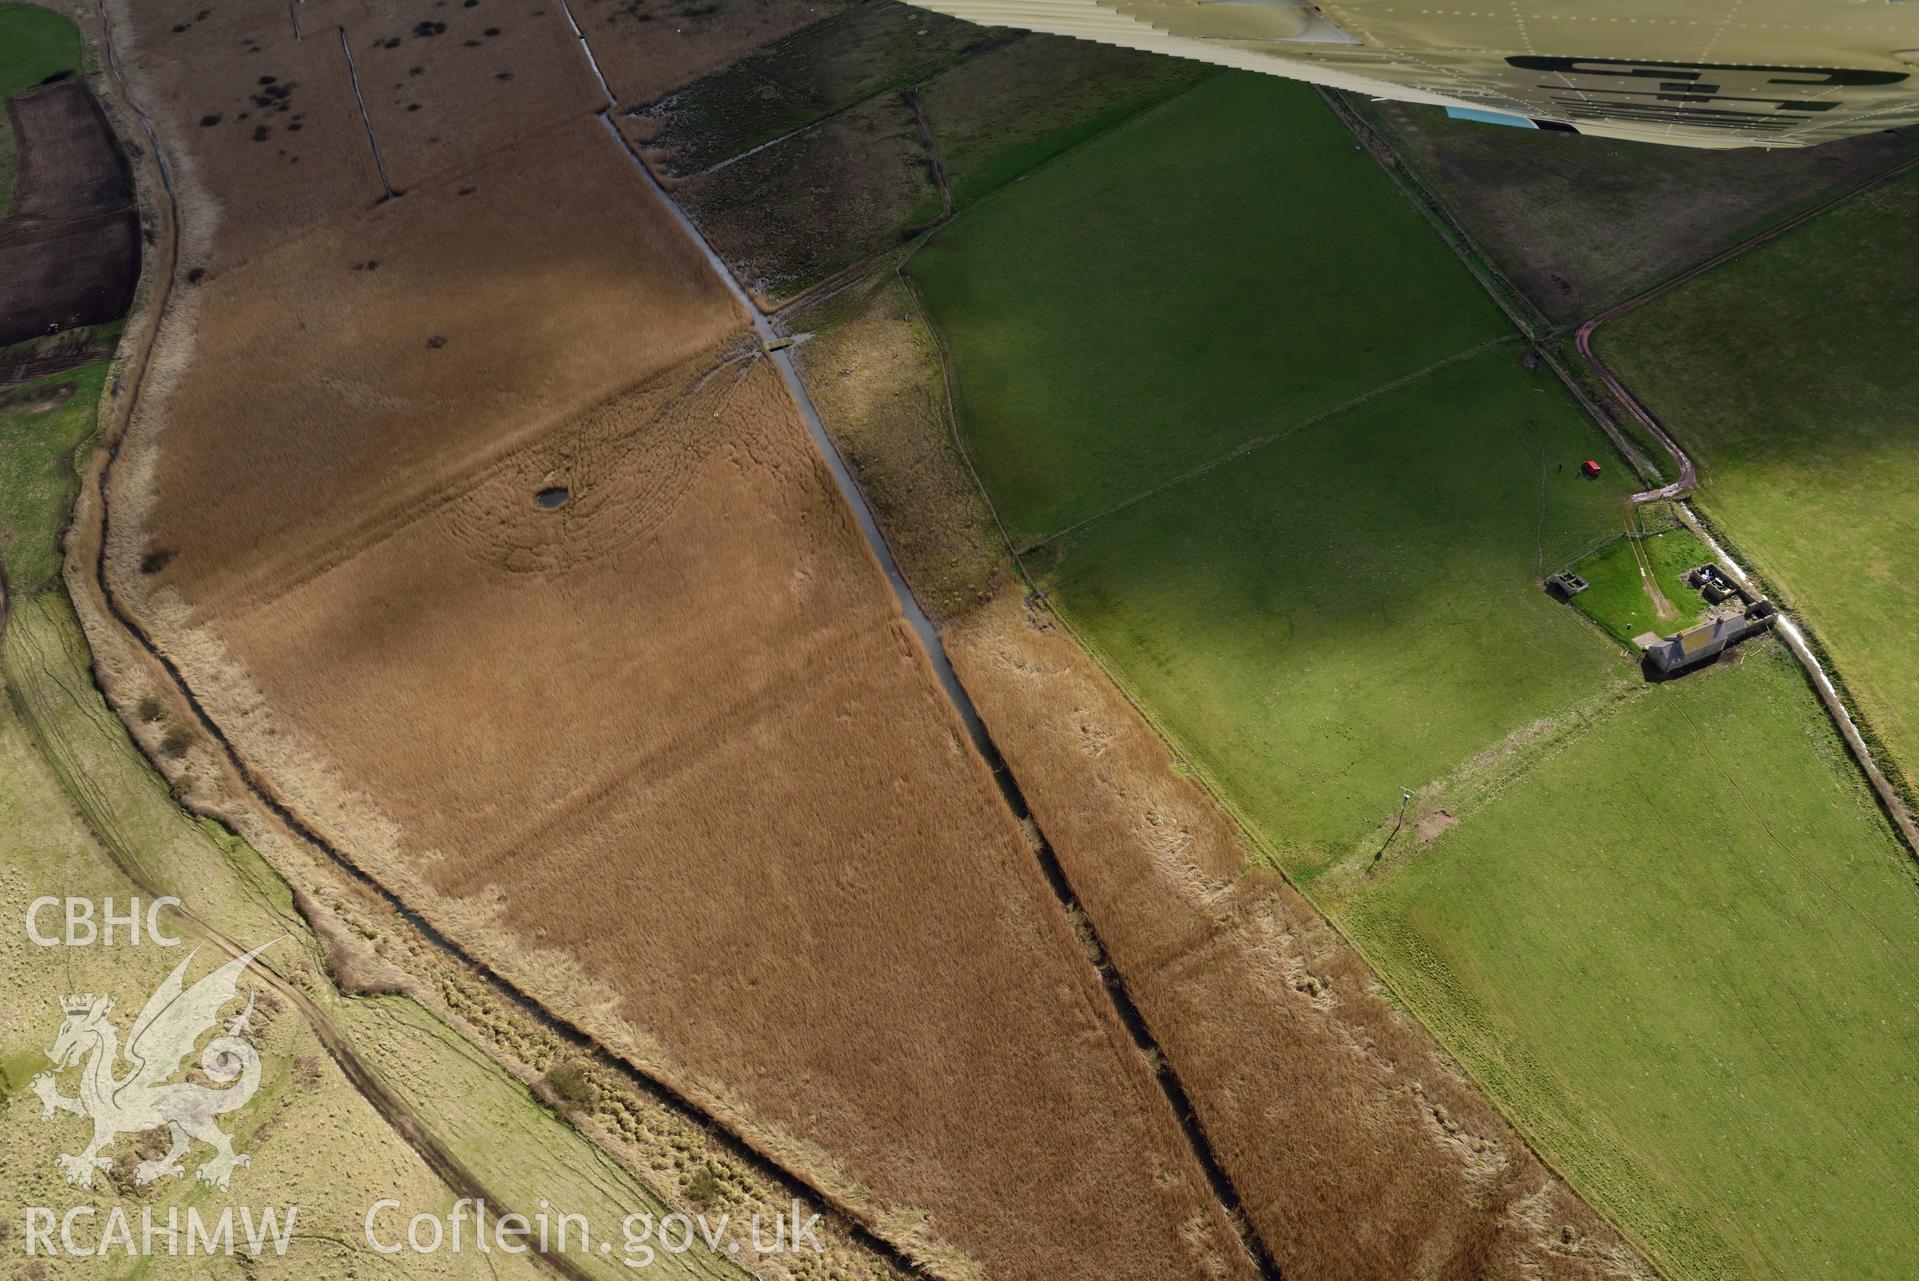 Castlemartin Corse wetland. Baseline aerial reconnaissance survey for the CHERISH Project. ? Crown: CHERISH PROJECT 2018. Produced with EU funds through the Ireland Wales Co-operation Programme 2014-2020. All material made freely available through the Open Government Licence.